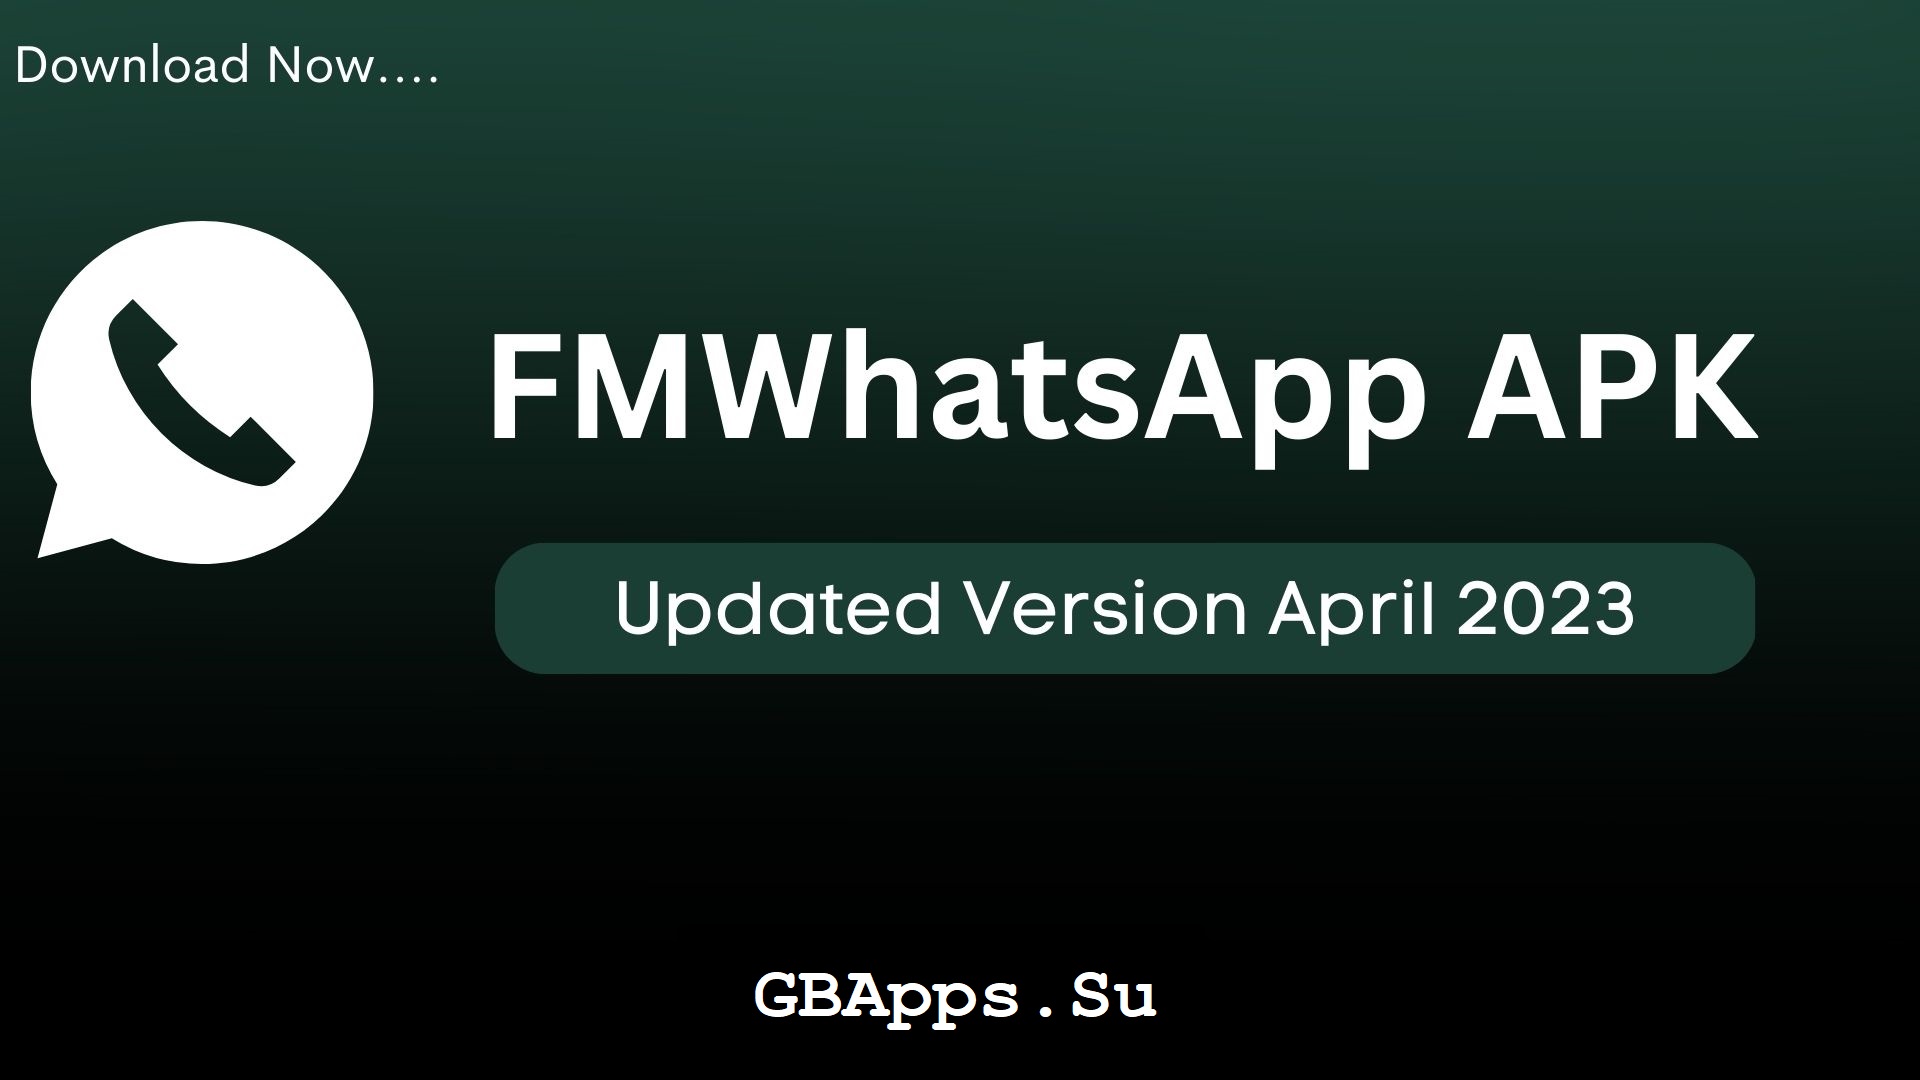 Where can I Download the FMWhatsApp APK